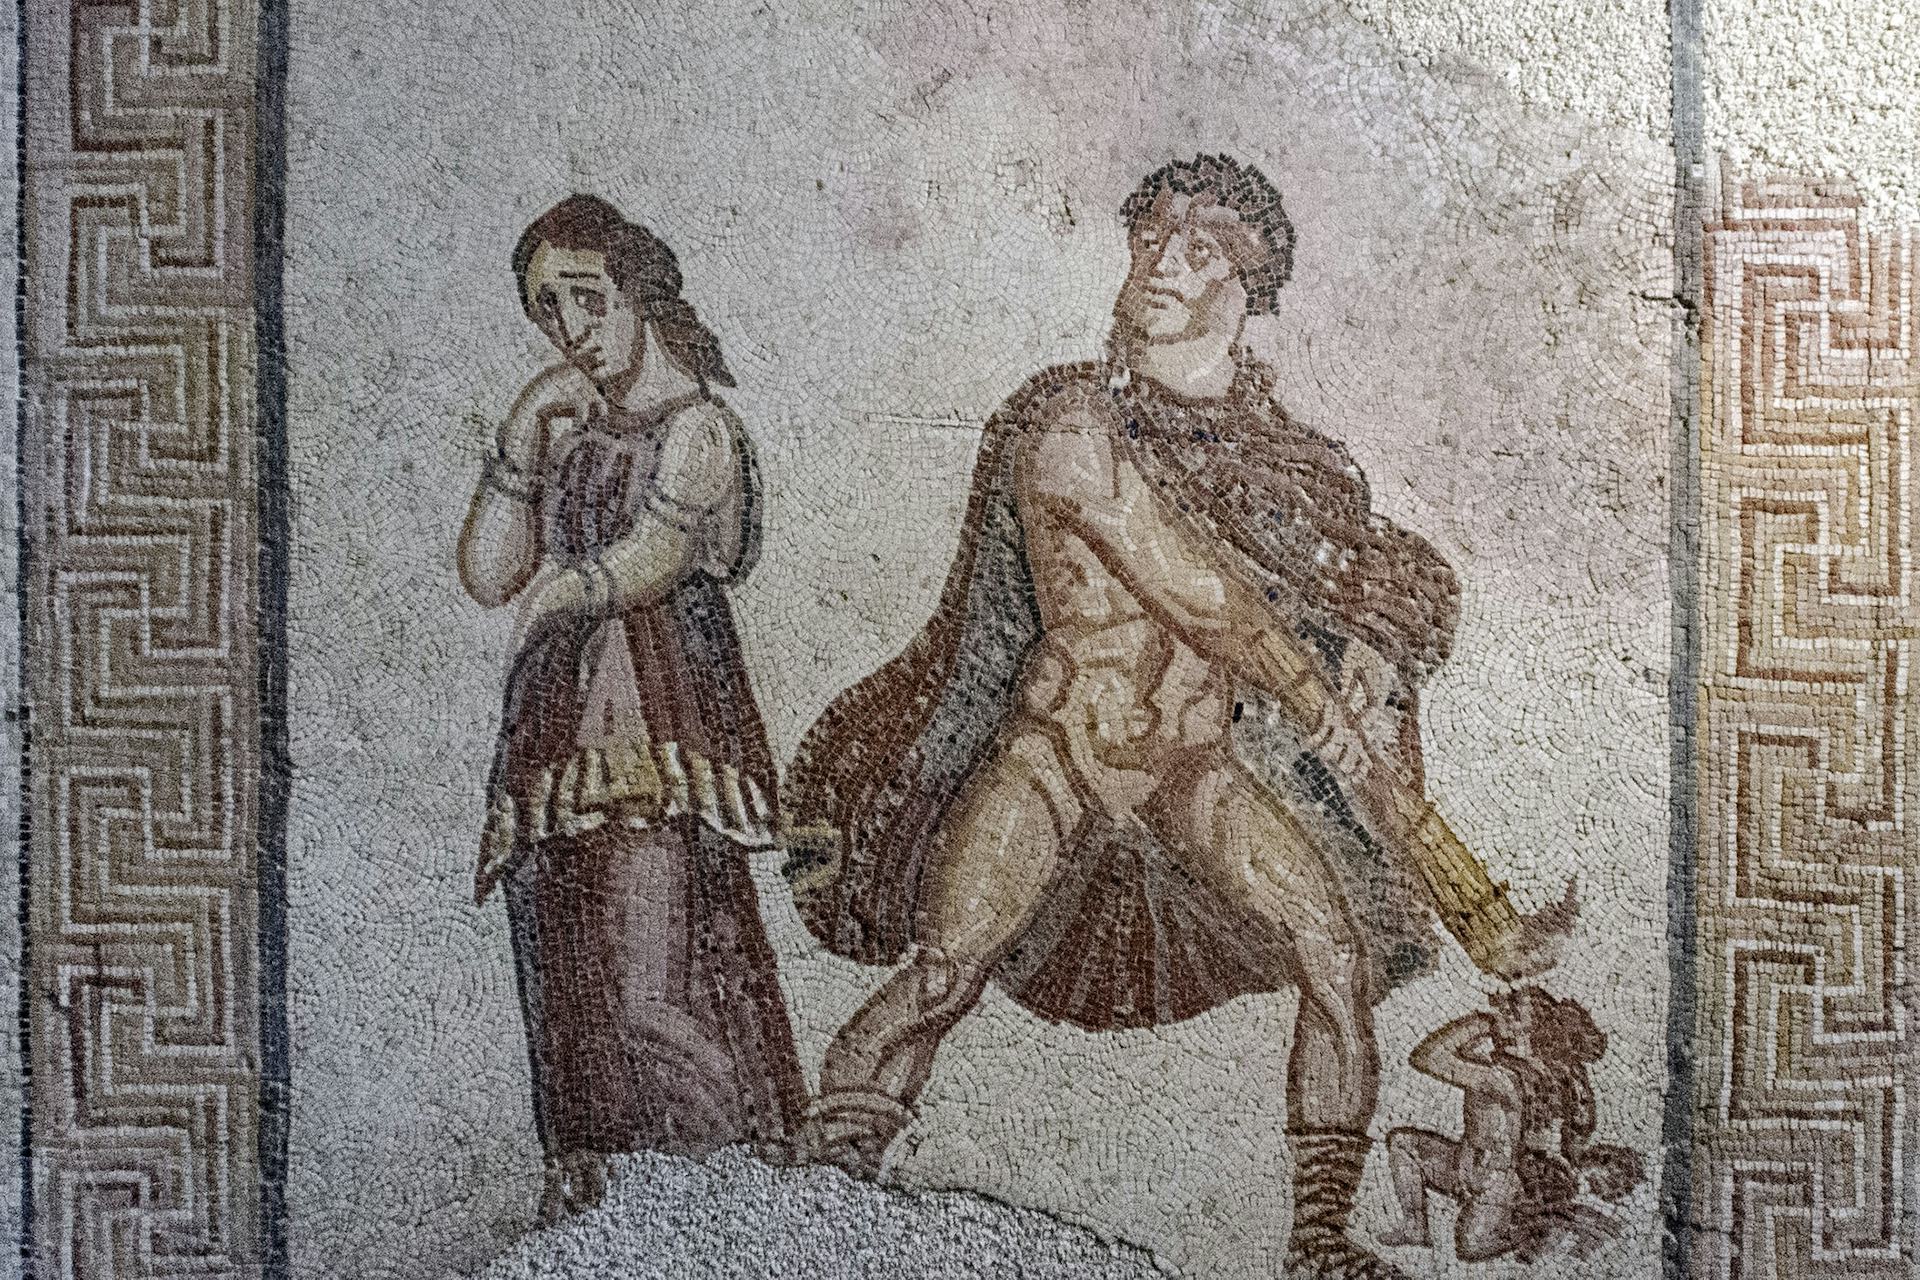 Mosaic showing the madness of Heracles